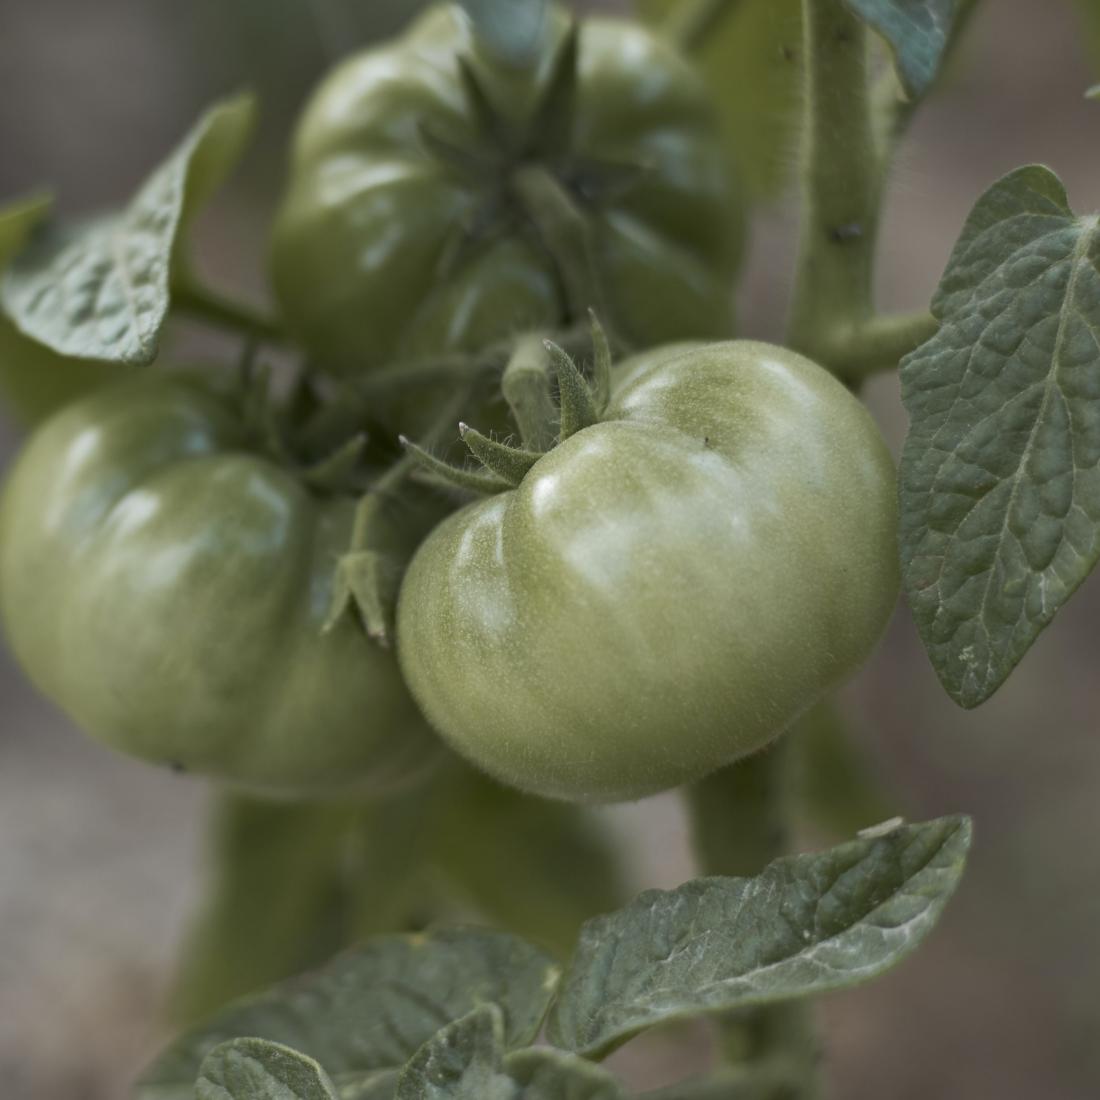 Fried Green Tomatoes - exhibit by aberson